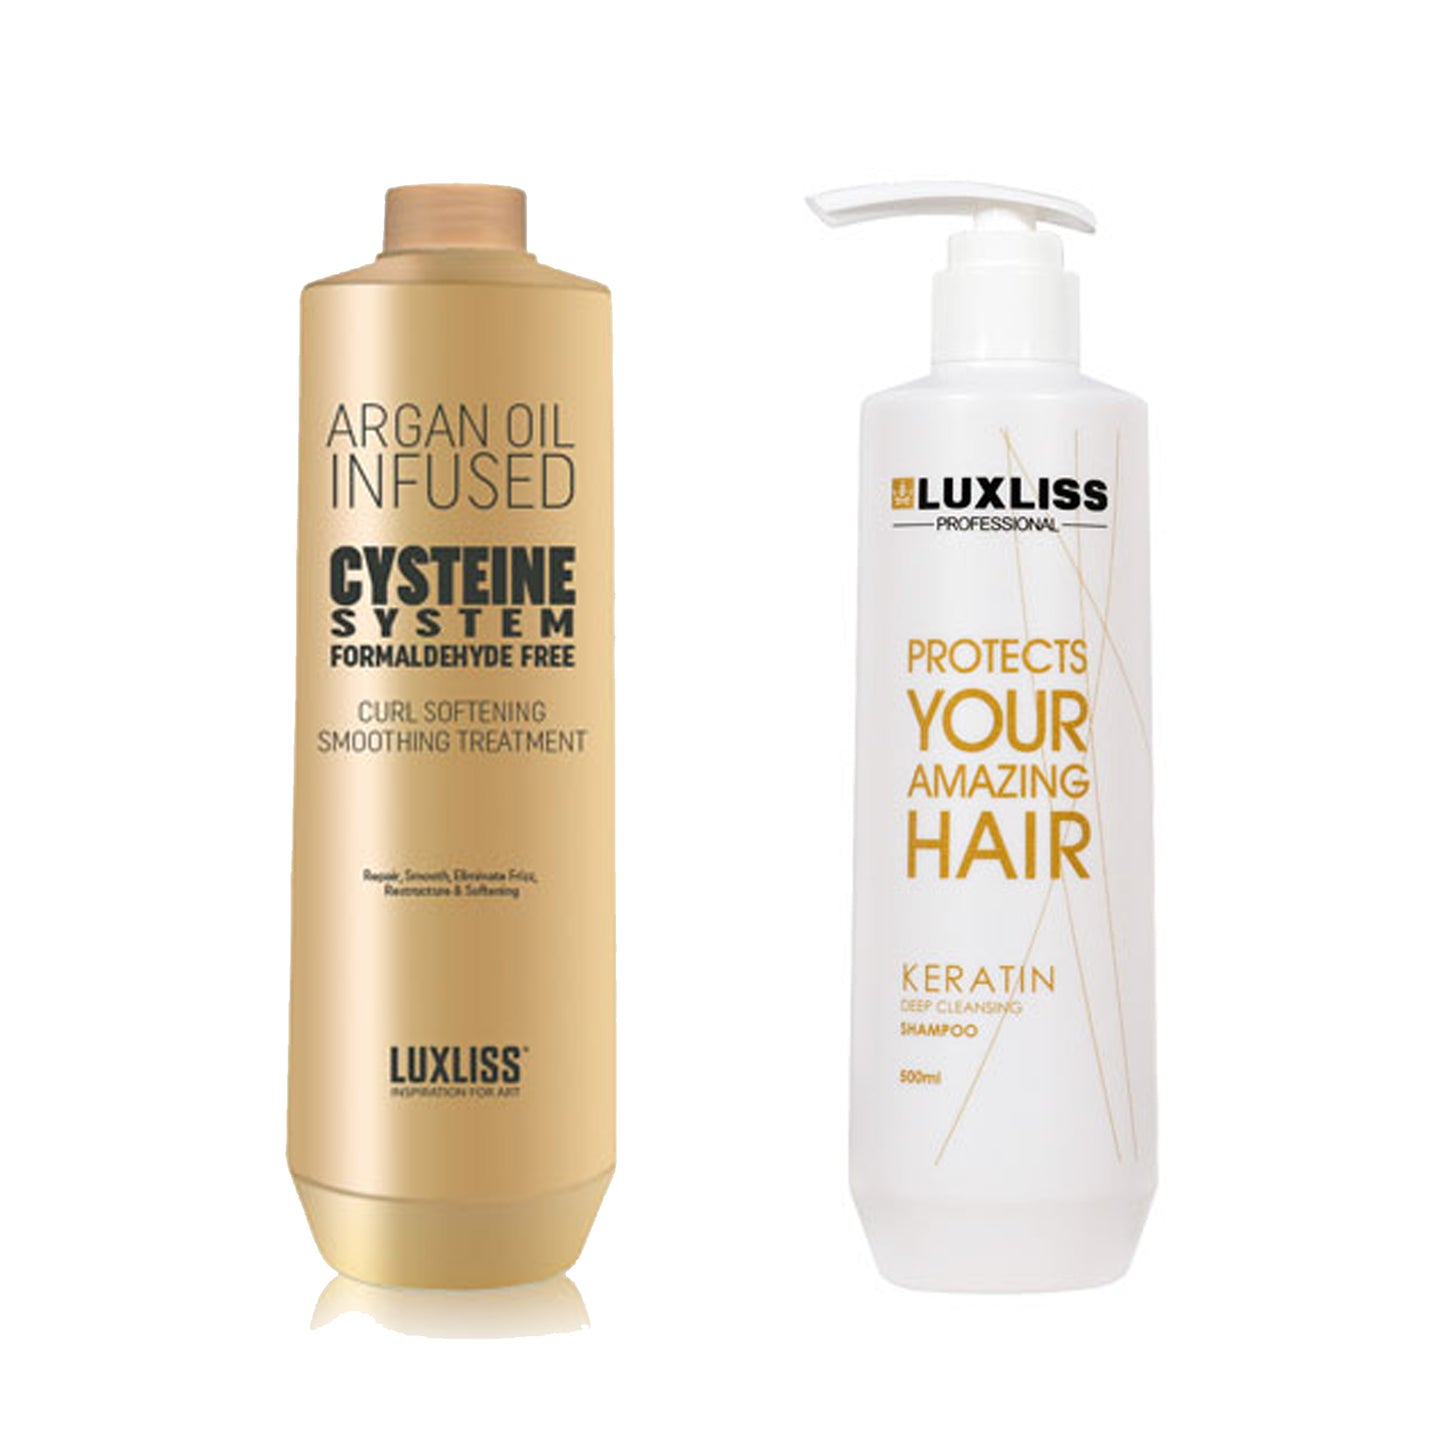 Luxliss Keratin Cysteine System and Curl softening Smooth treatment 100ml